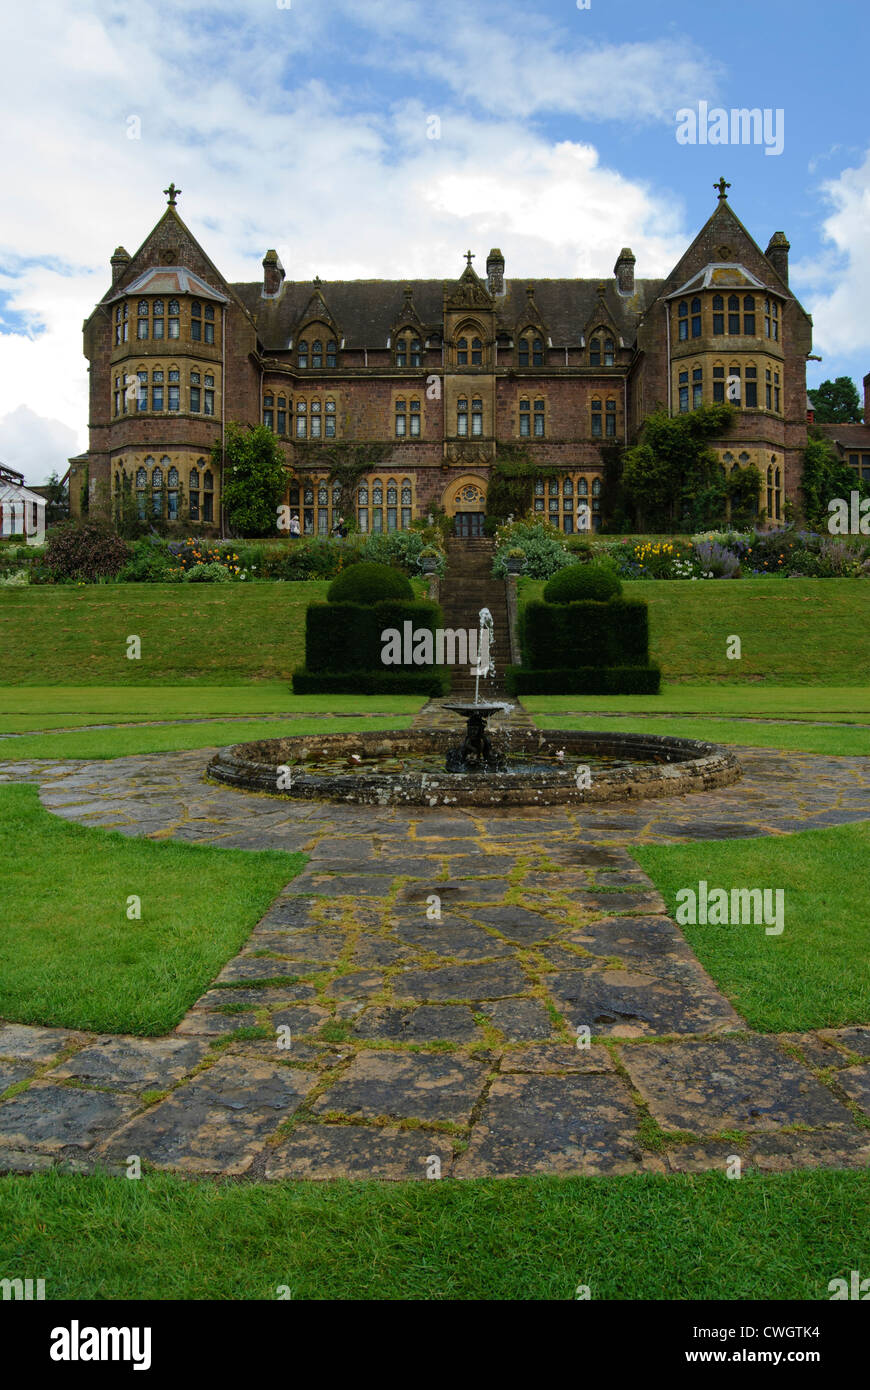 Knightshayes Court and garden, near Tiverton in Devon. Victorian country house with richly decorated interiors and garden. Stock Photo